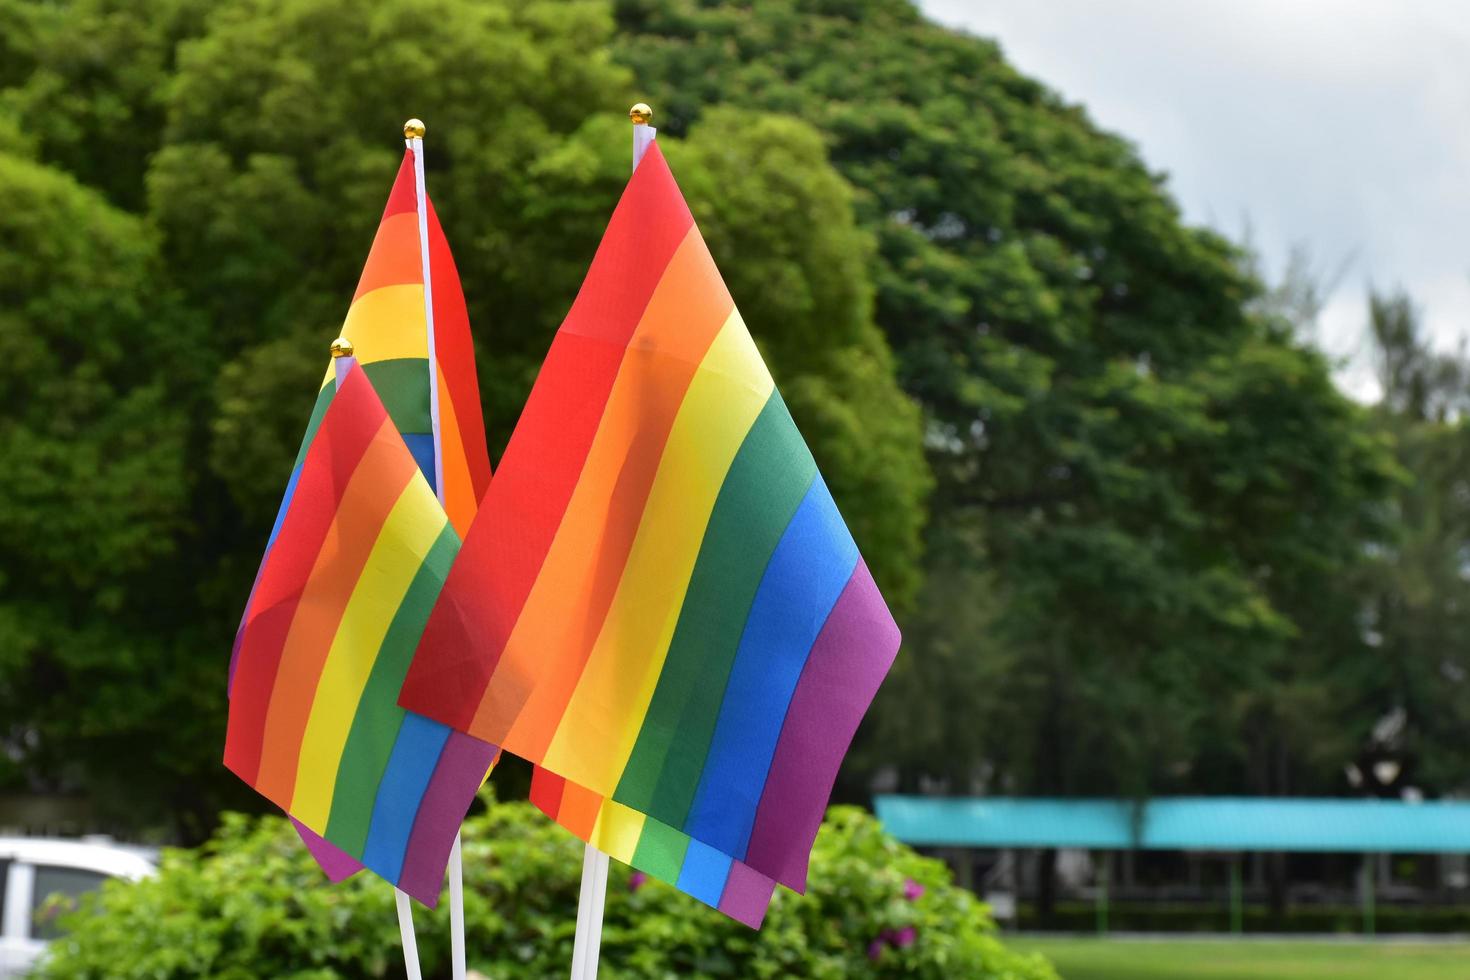 Rainbow flags, symbol of lgbt gender diversity, showing in front of grass court of school playground, blurred building background, concept for lgbt celebrations in pride month, june, over the world. photo